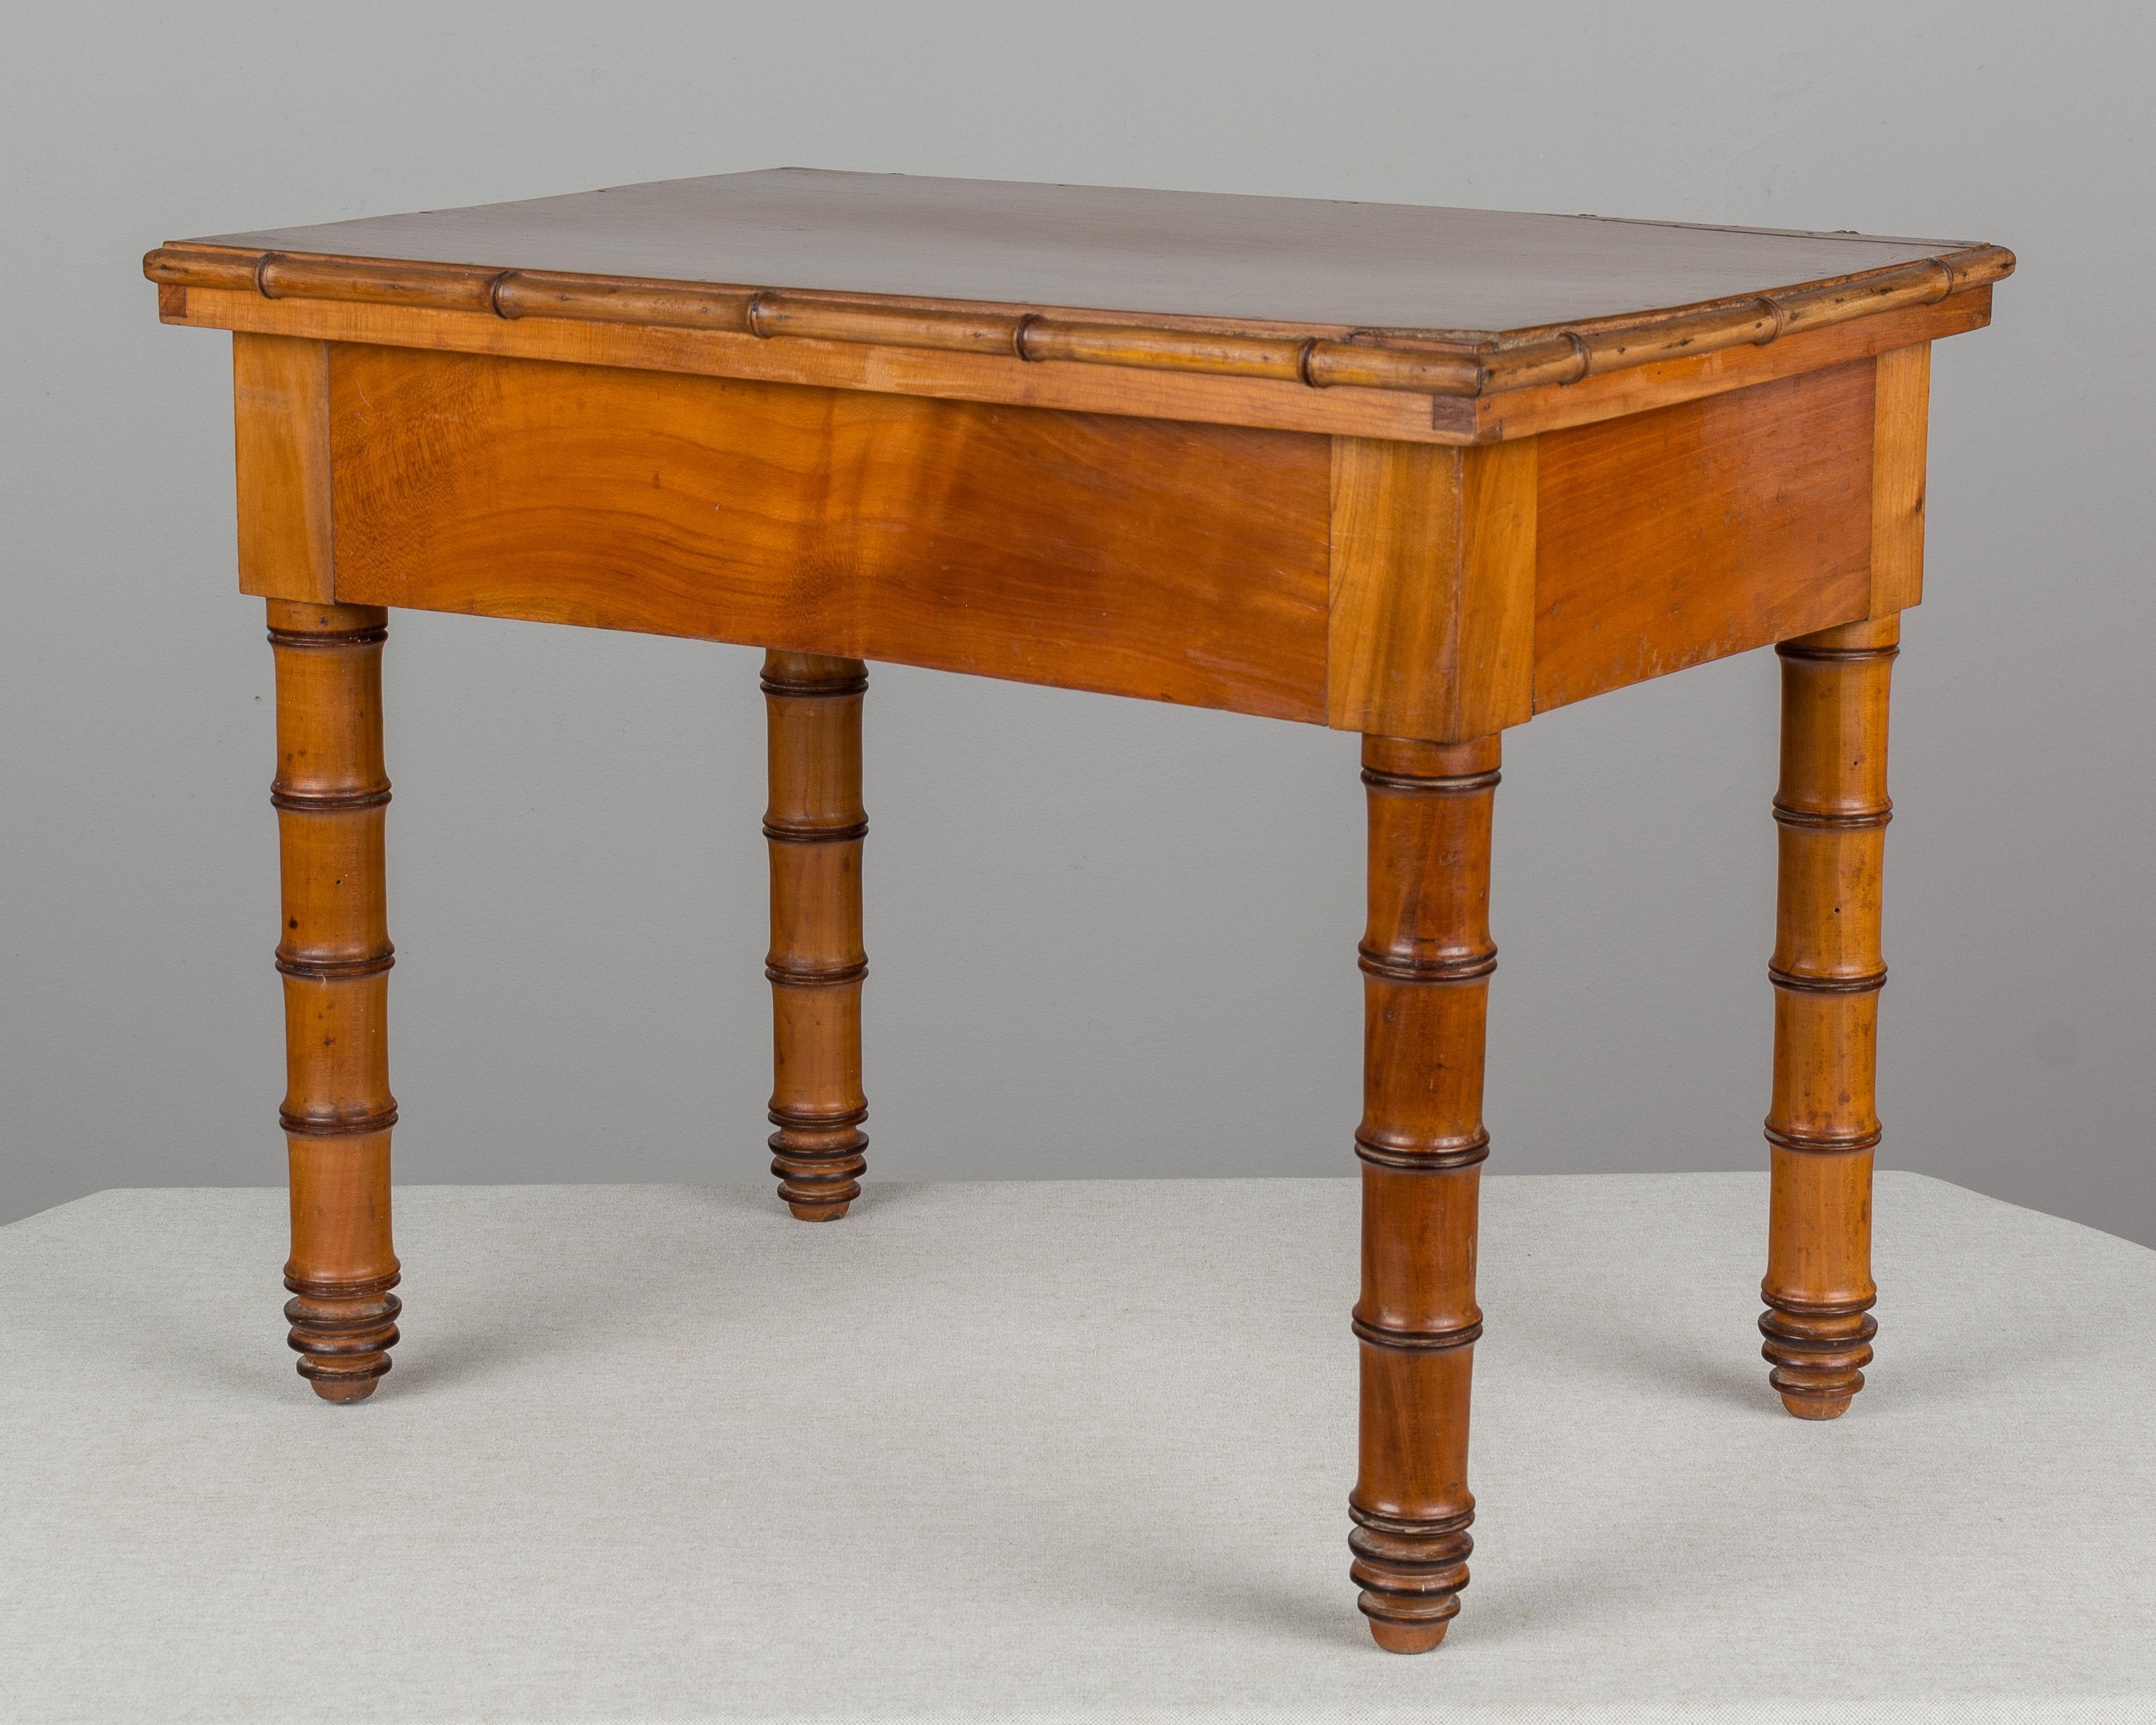 A 19th century French faux bamboo small side table made of solid cherry. Top opens to reveal a porcelain bidet inside a zinc liner.